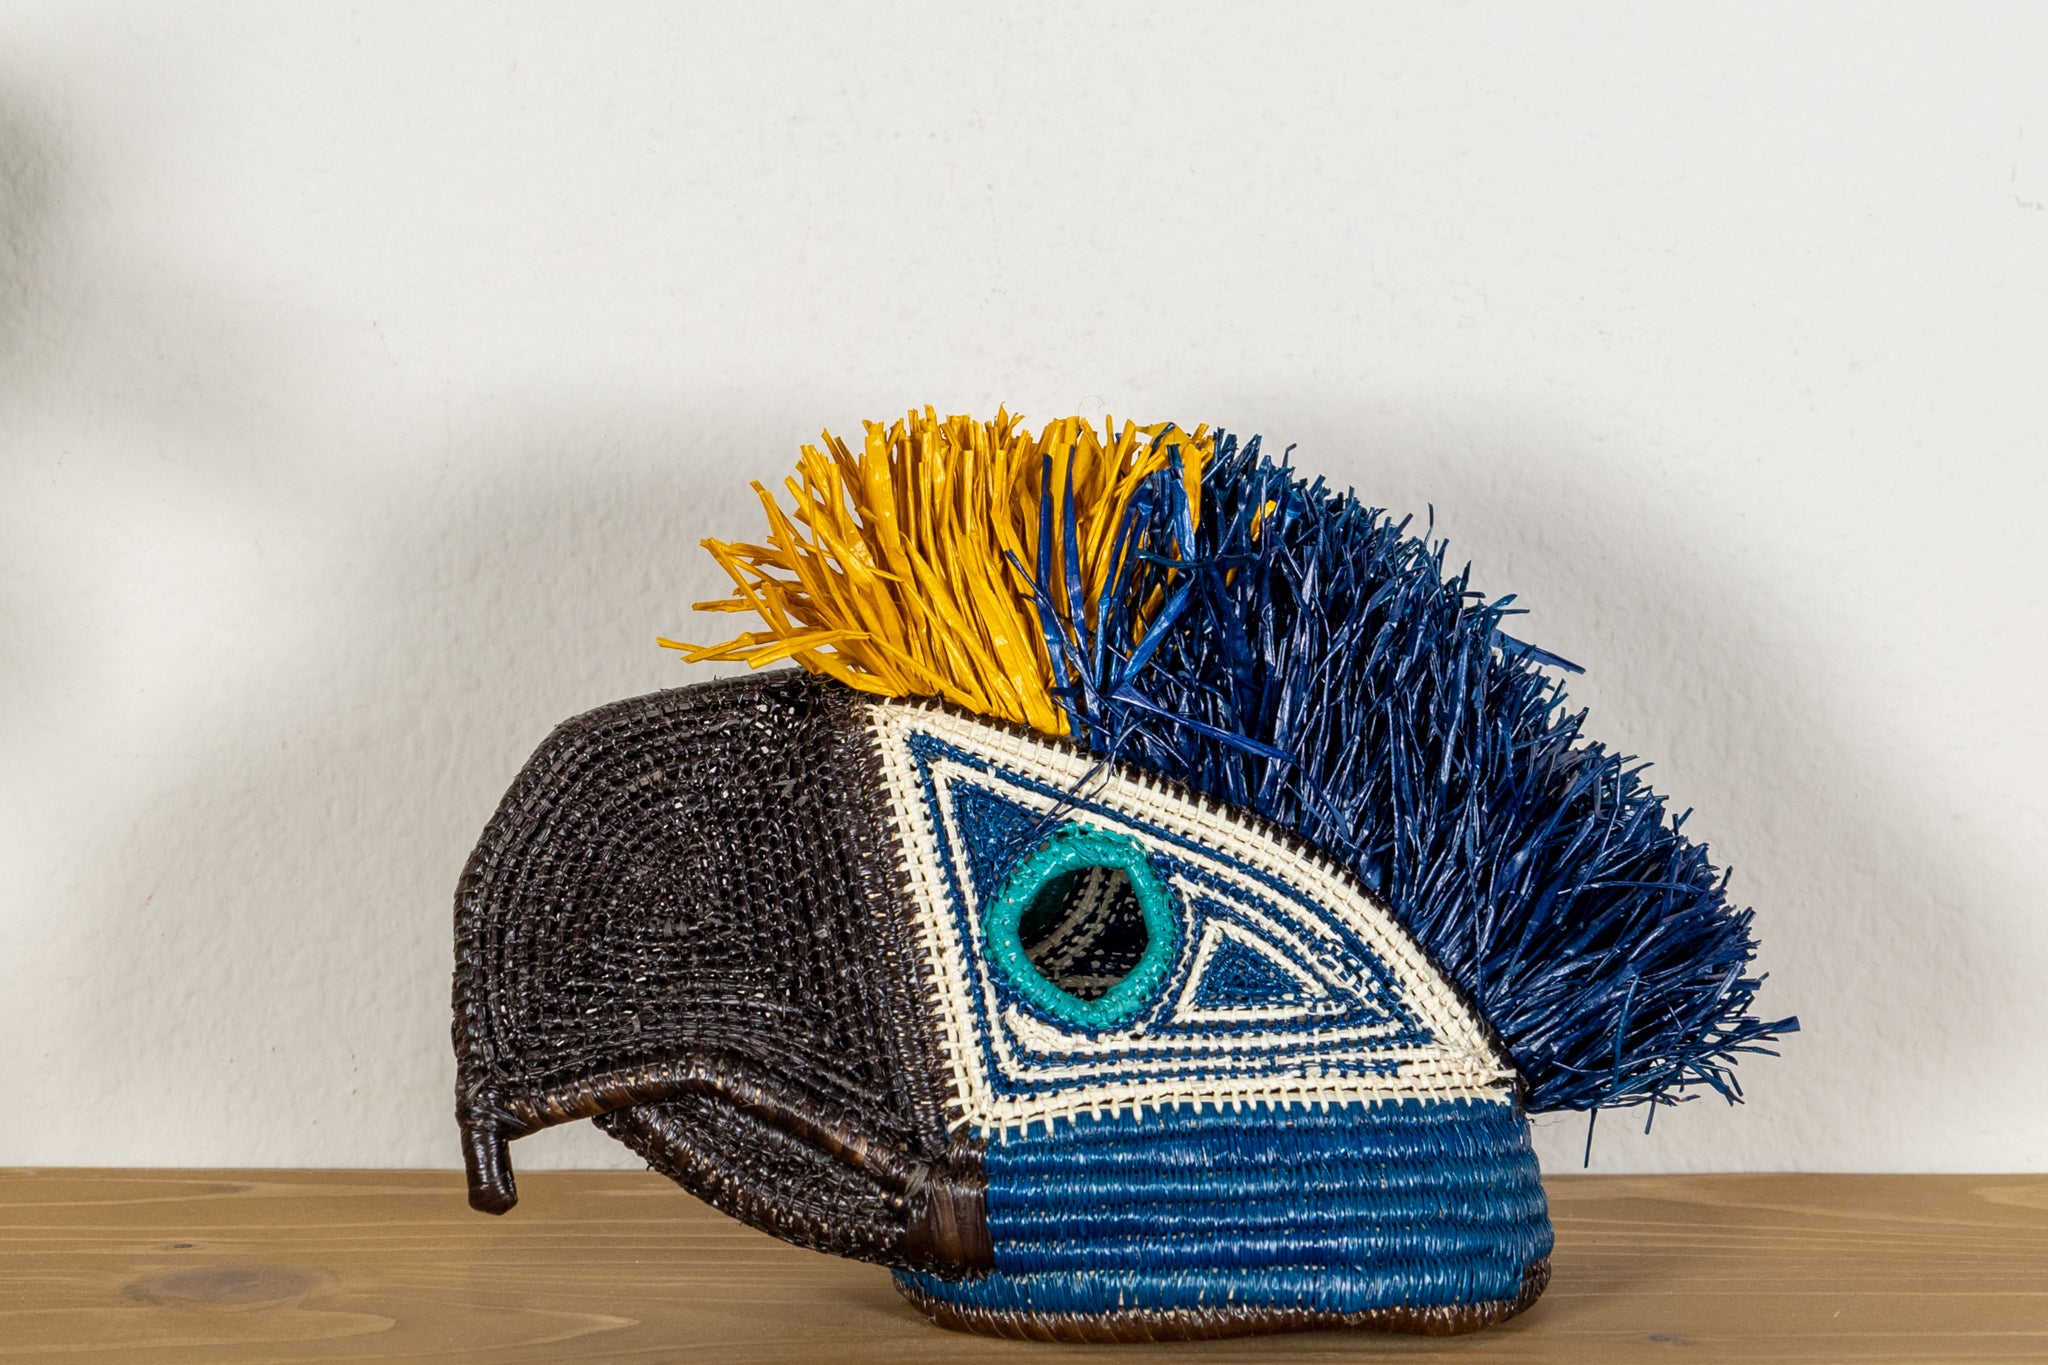 Blue and Yellow Macaw Mask